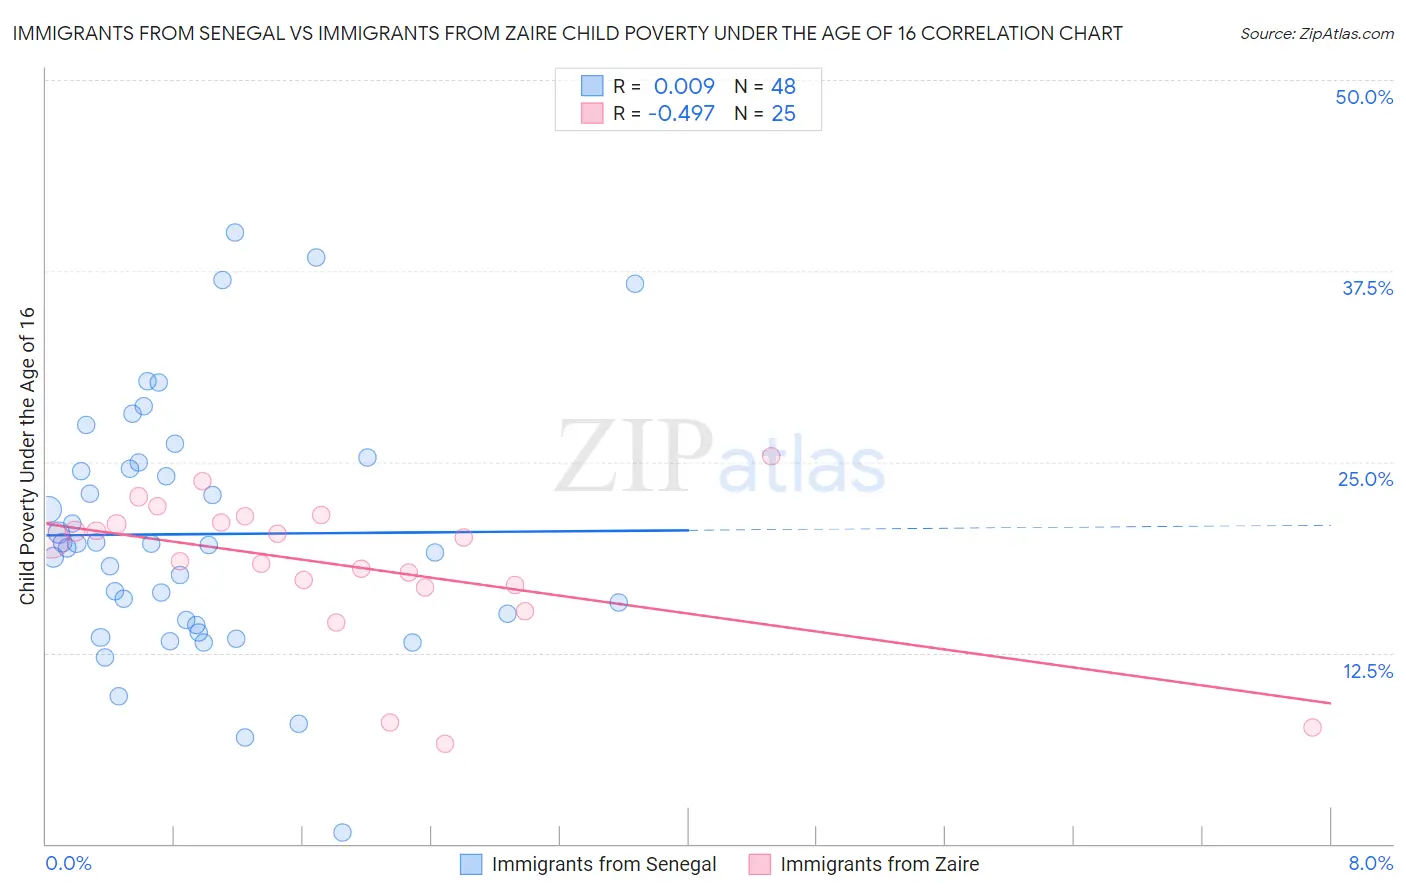 Immigrants from Senegal vs Immigrants from Zaire Child Poverty Under the Age of 16